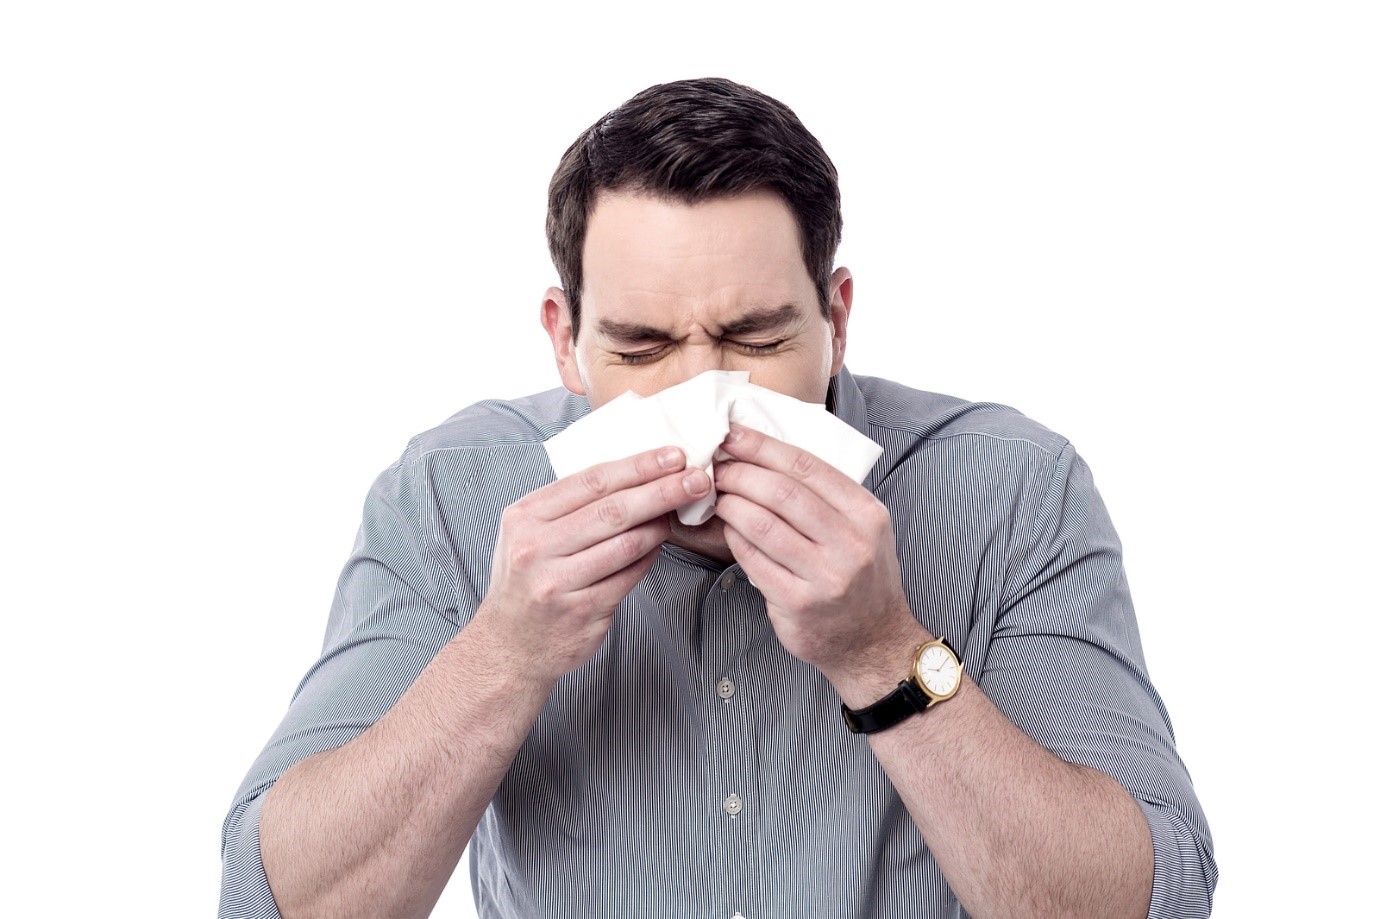 A man blowing his nose into a paper napkin.